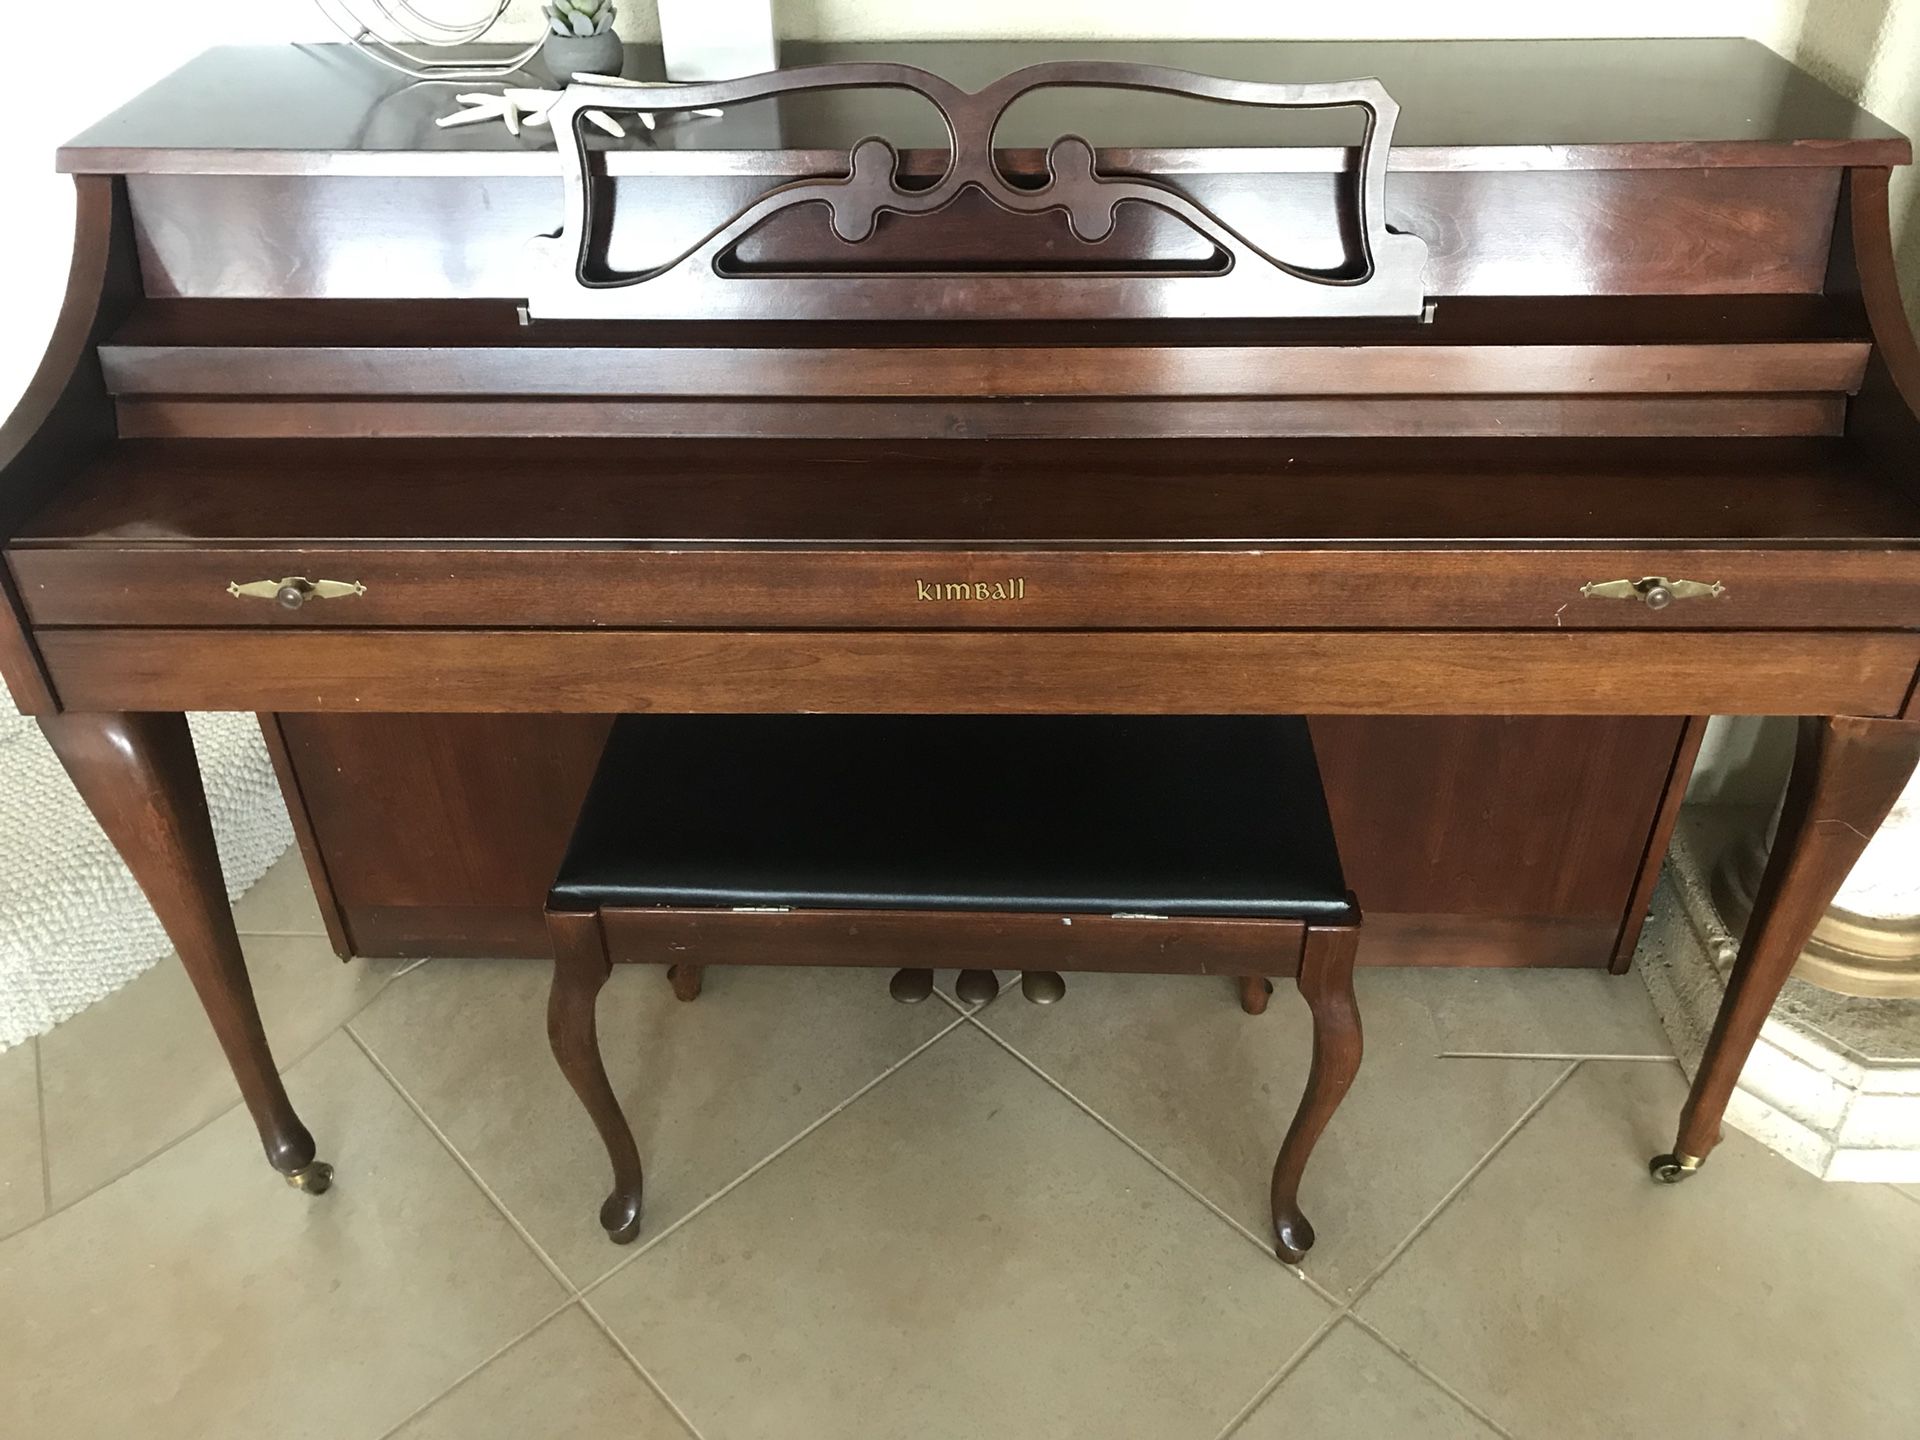 FREE - Very nice Kimball upright Piano - great for lessons, just come pick it up - FREE